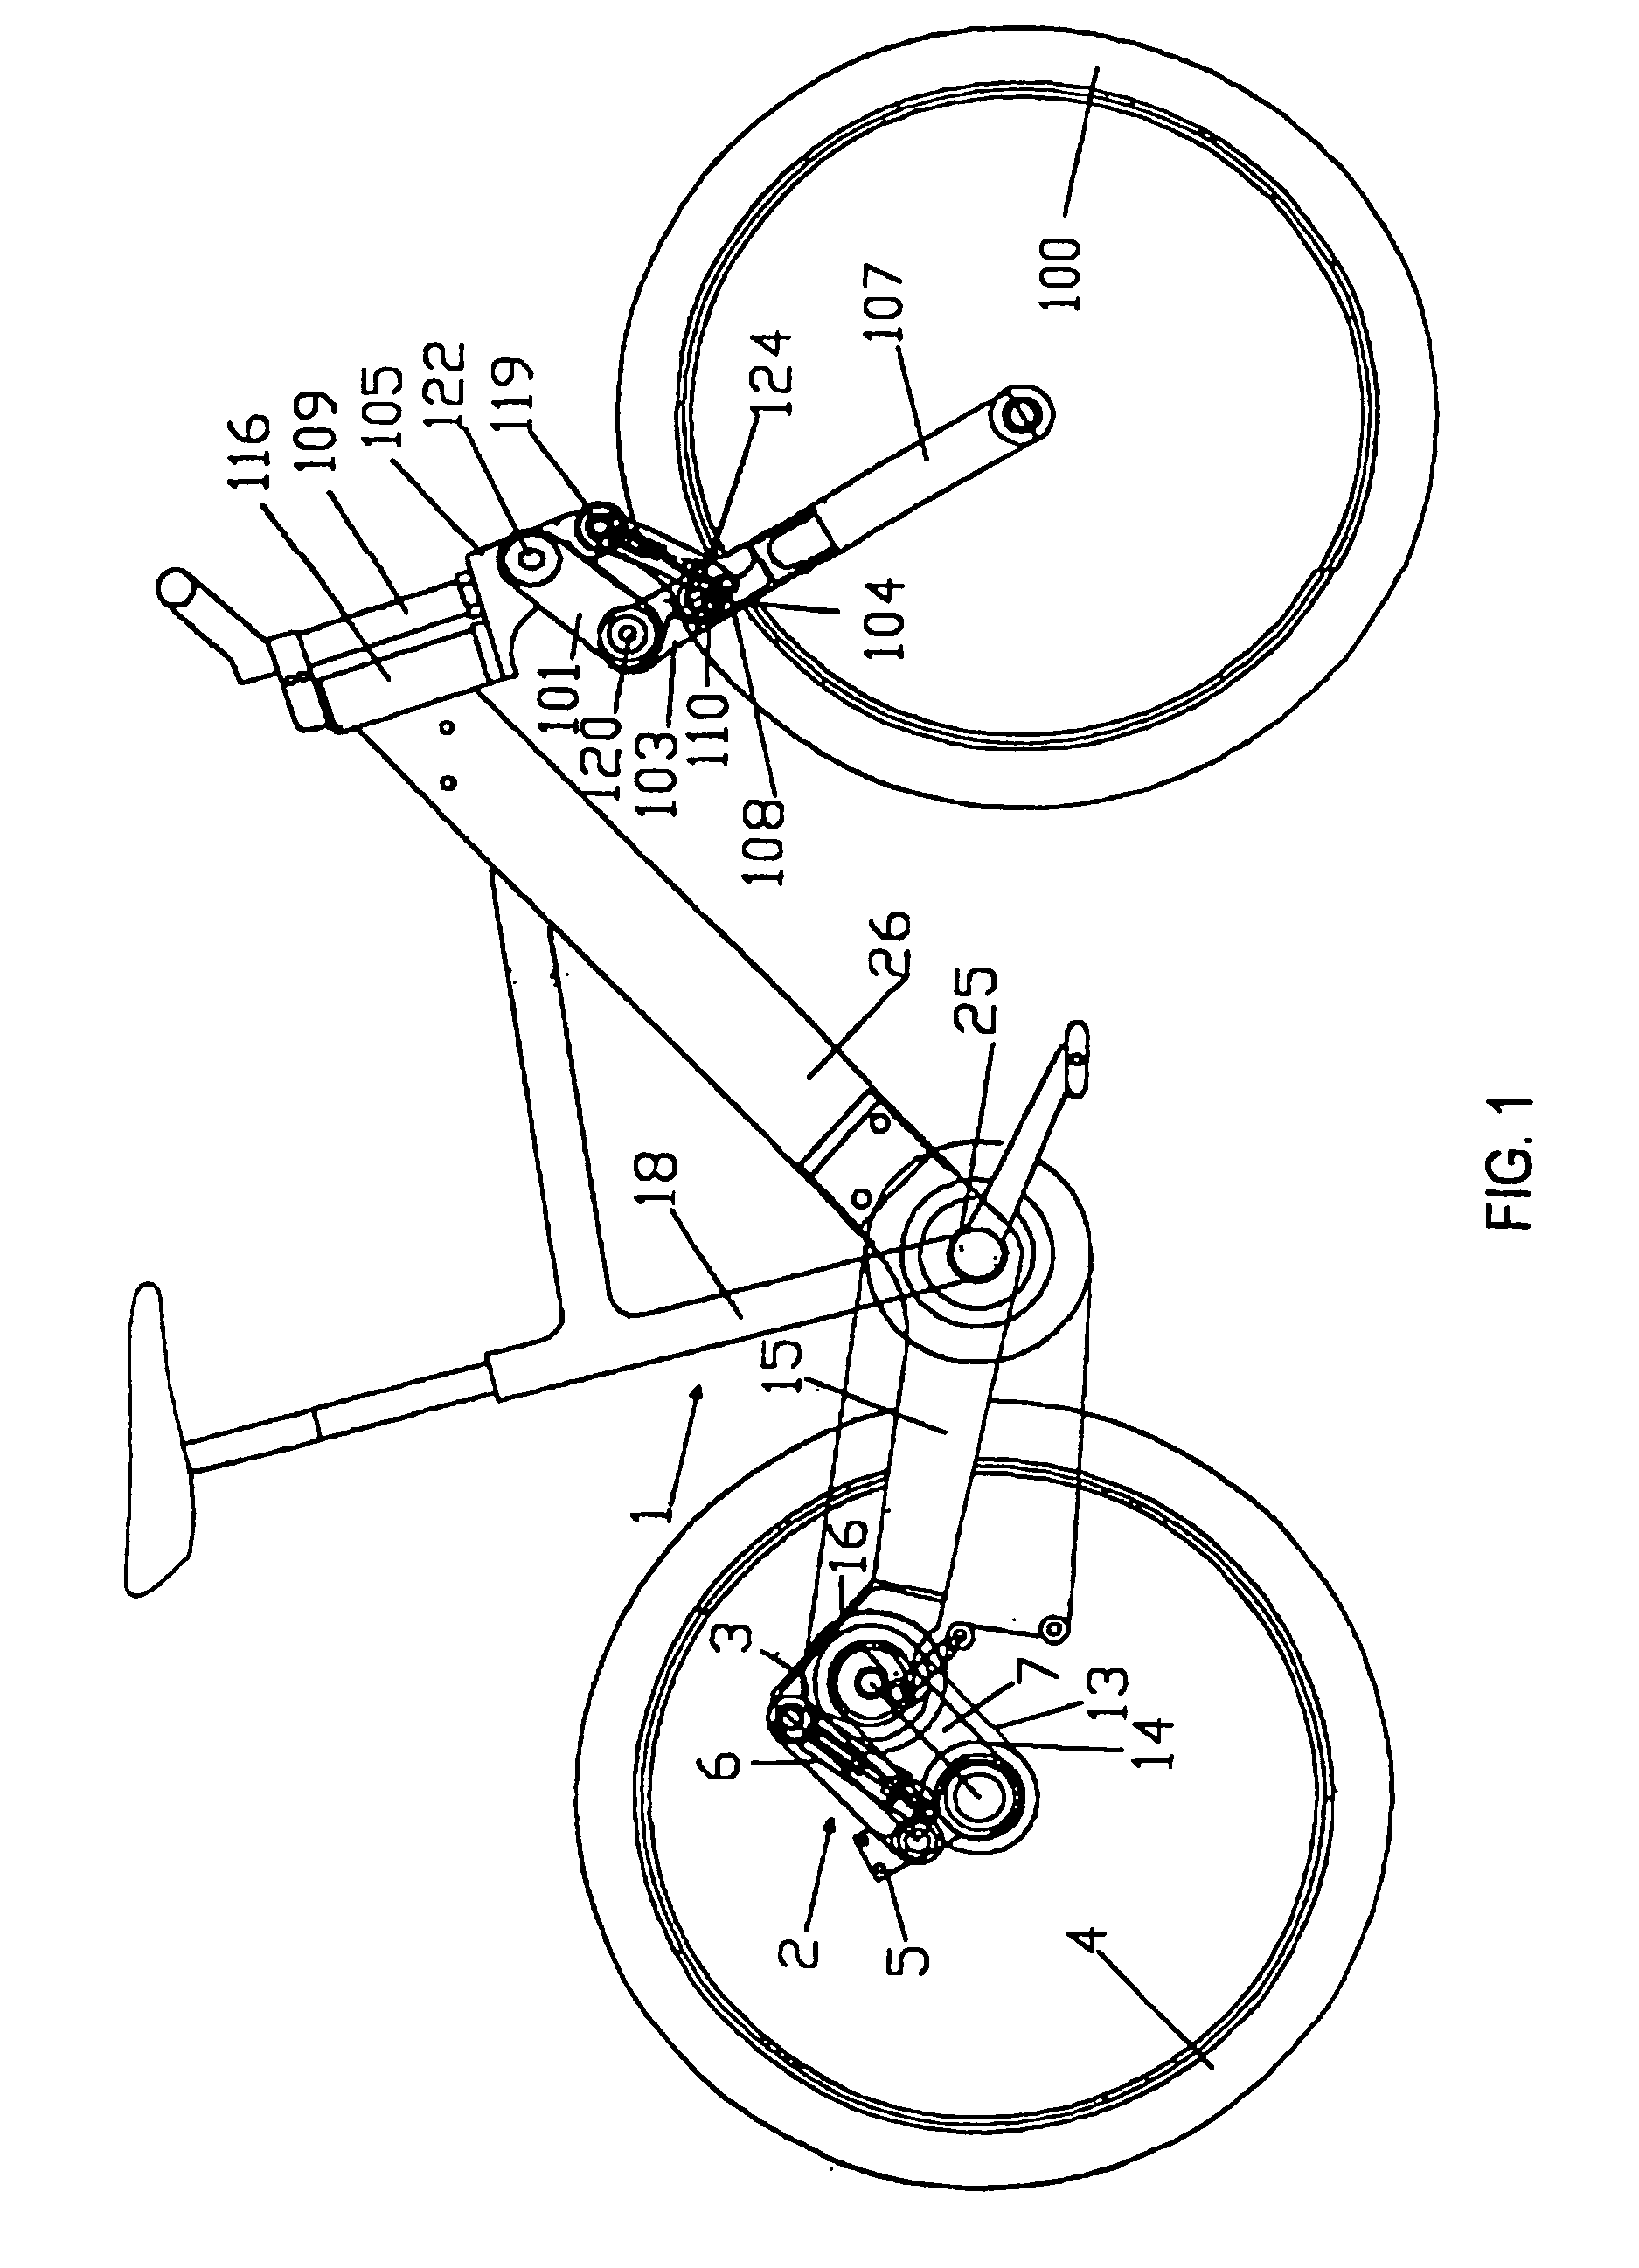 All-suspension bicycle frame with isolated drive gear